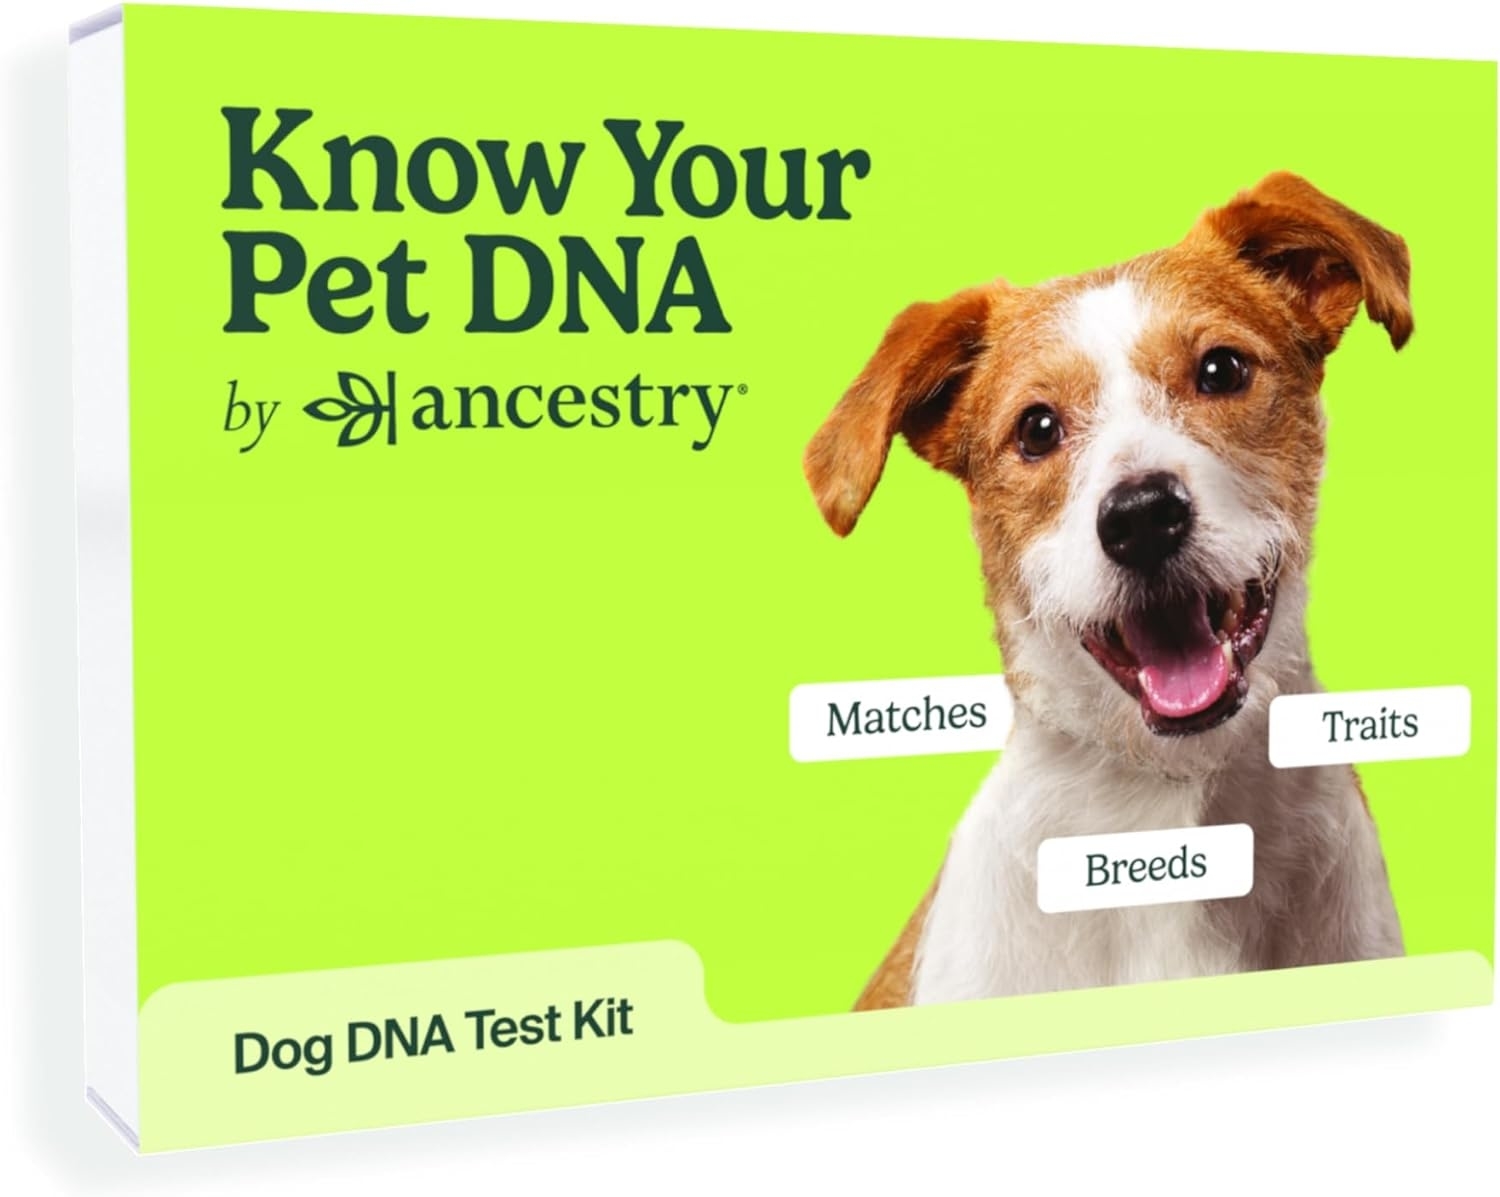 the ancestry box for the dog dna kit